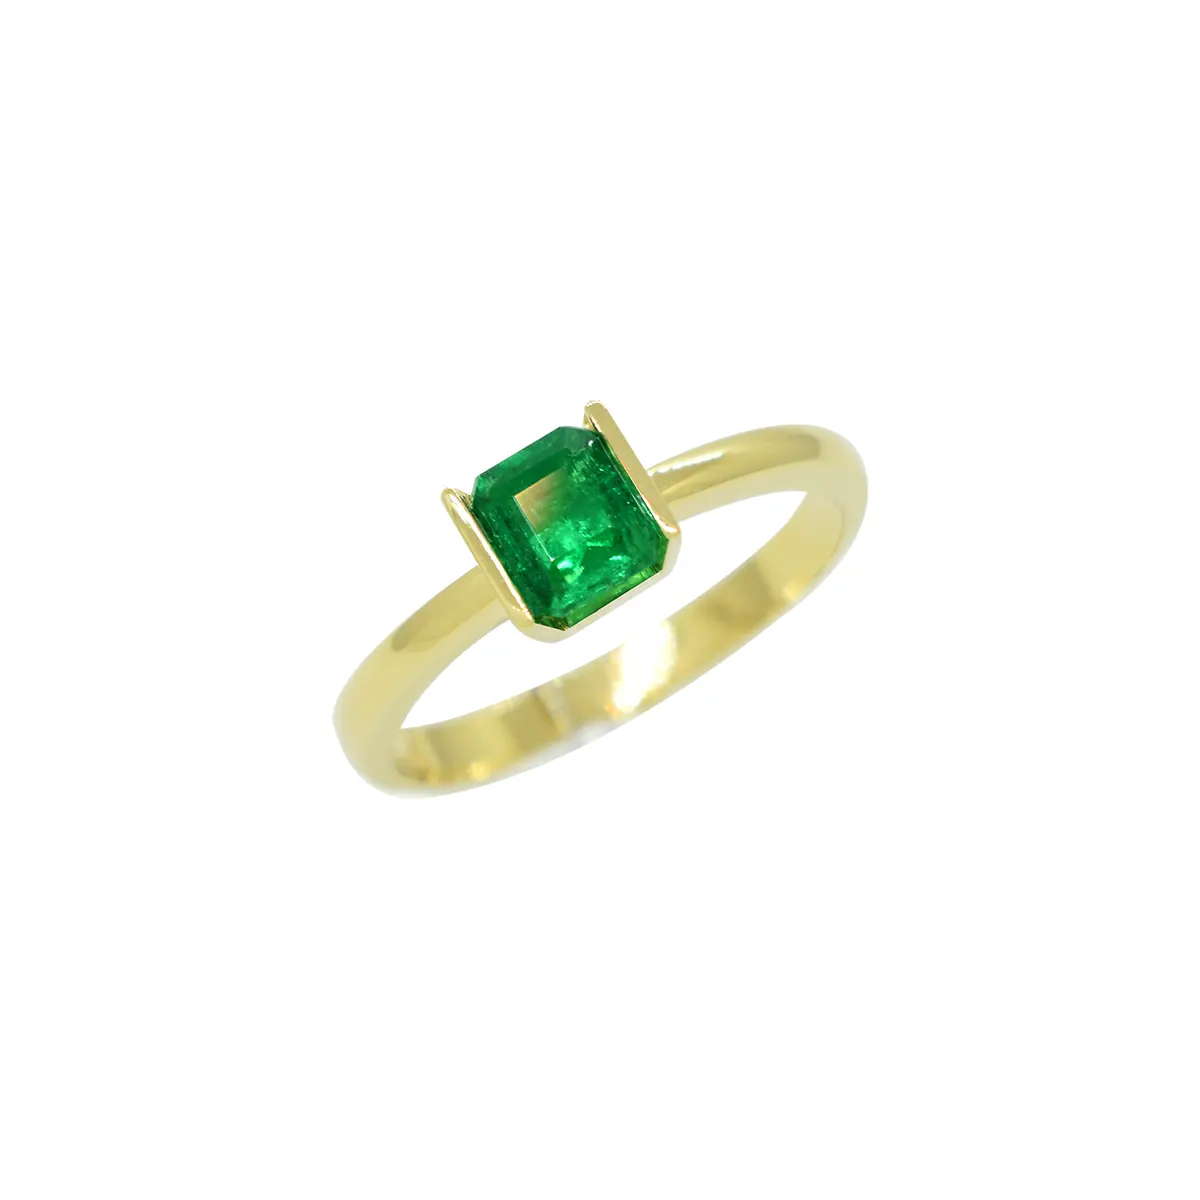 Solitaire emerald ring with 0.50 Ct. square shape emerald cut natural emerald set in 18K gold half bezel open tension setting